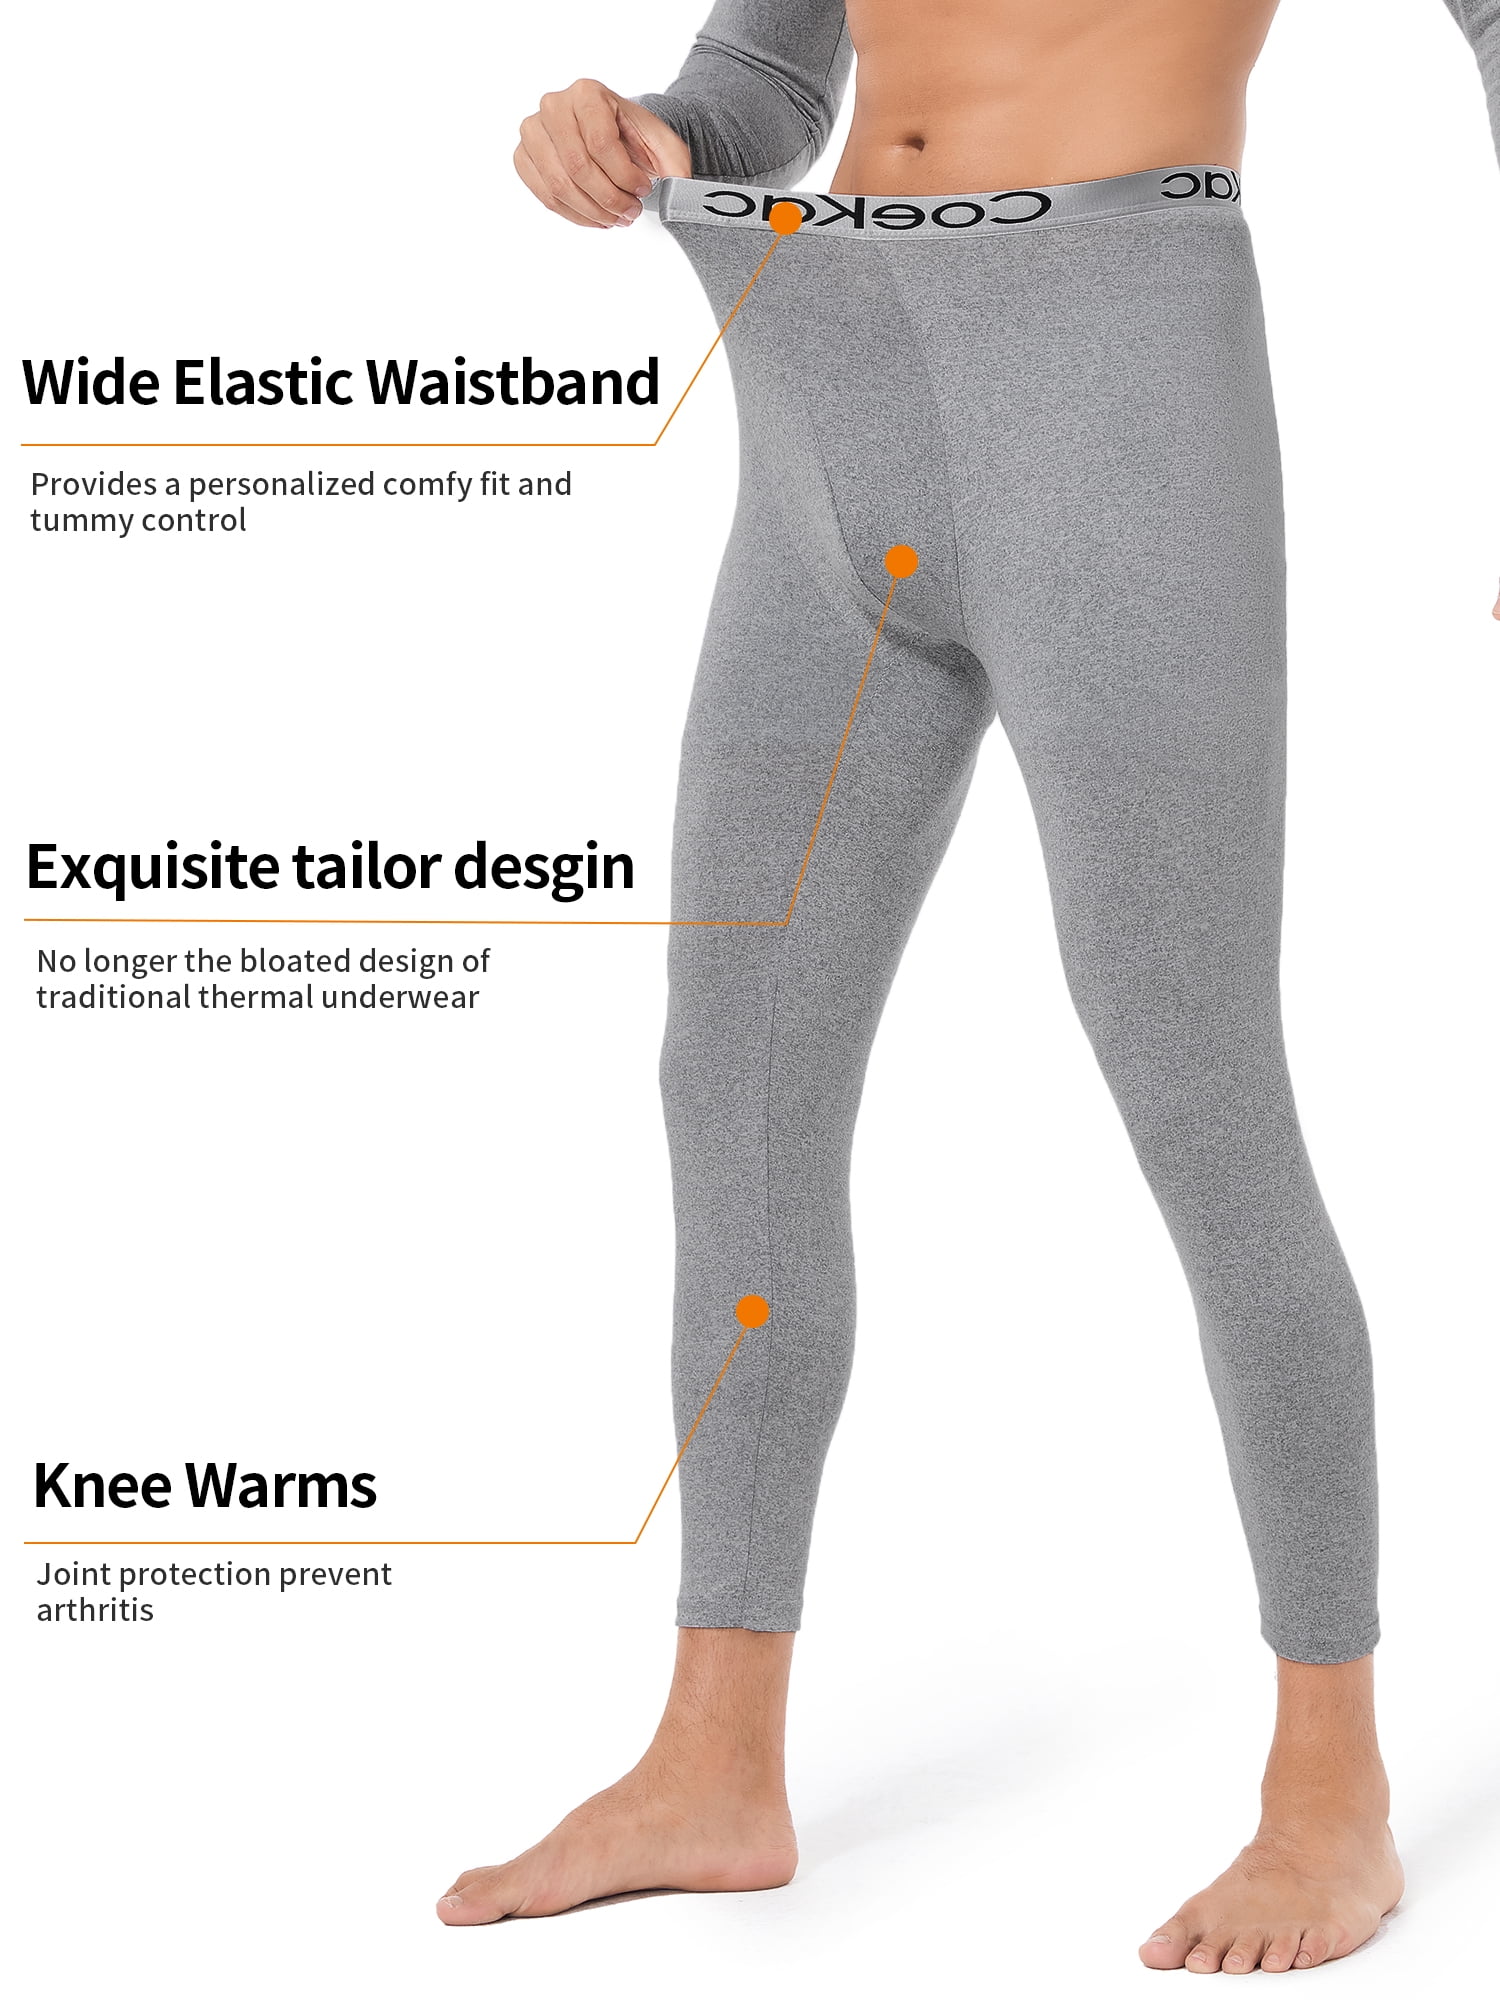 yingyy Winter Long Johns Men Thermal Underwear Self-heating Thick Home  Clothes T-shirts Breathable Skin Friendly Trousers Drak Gray XXL 